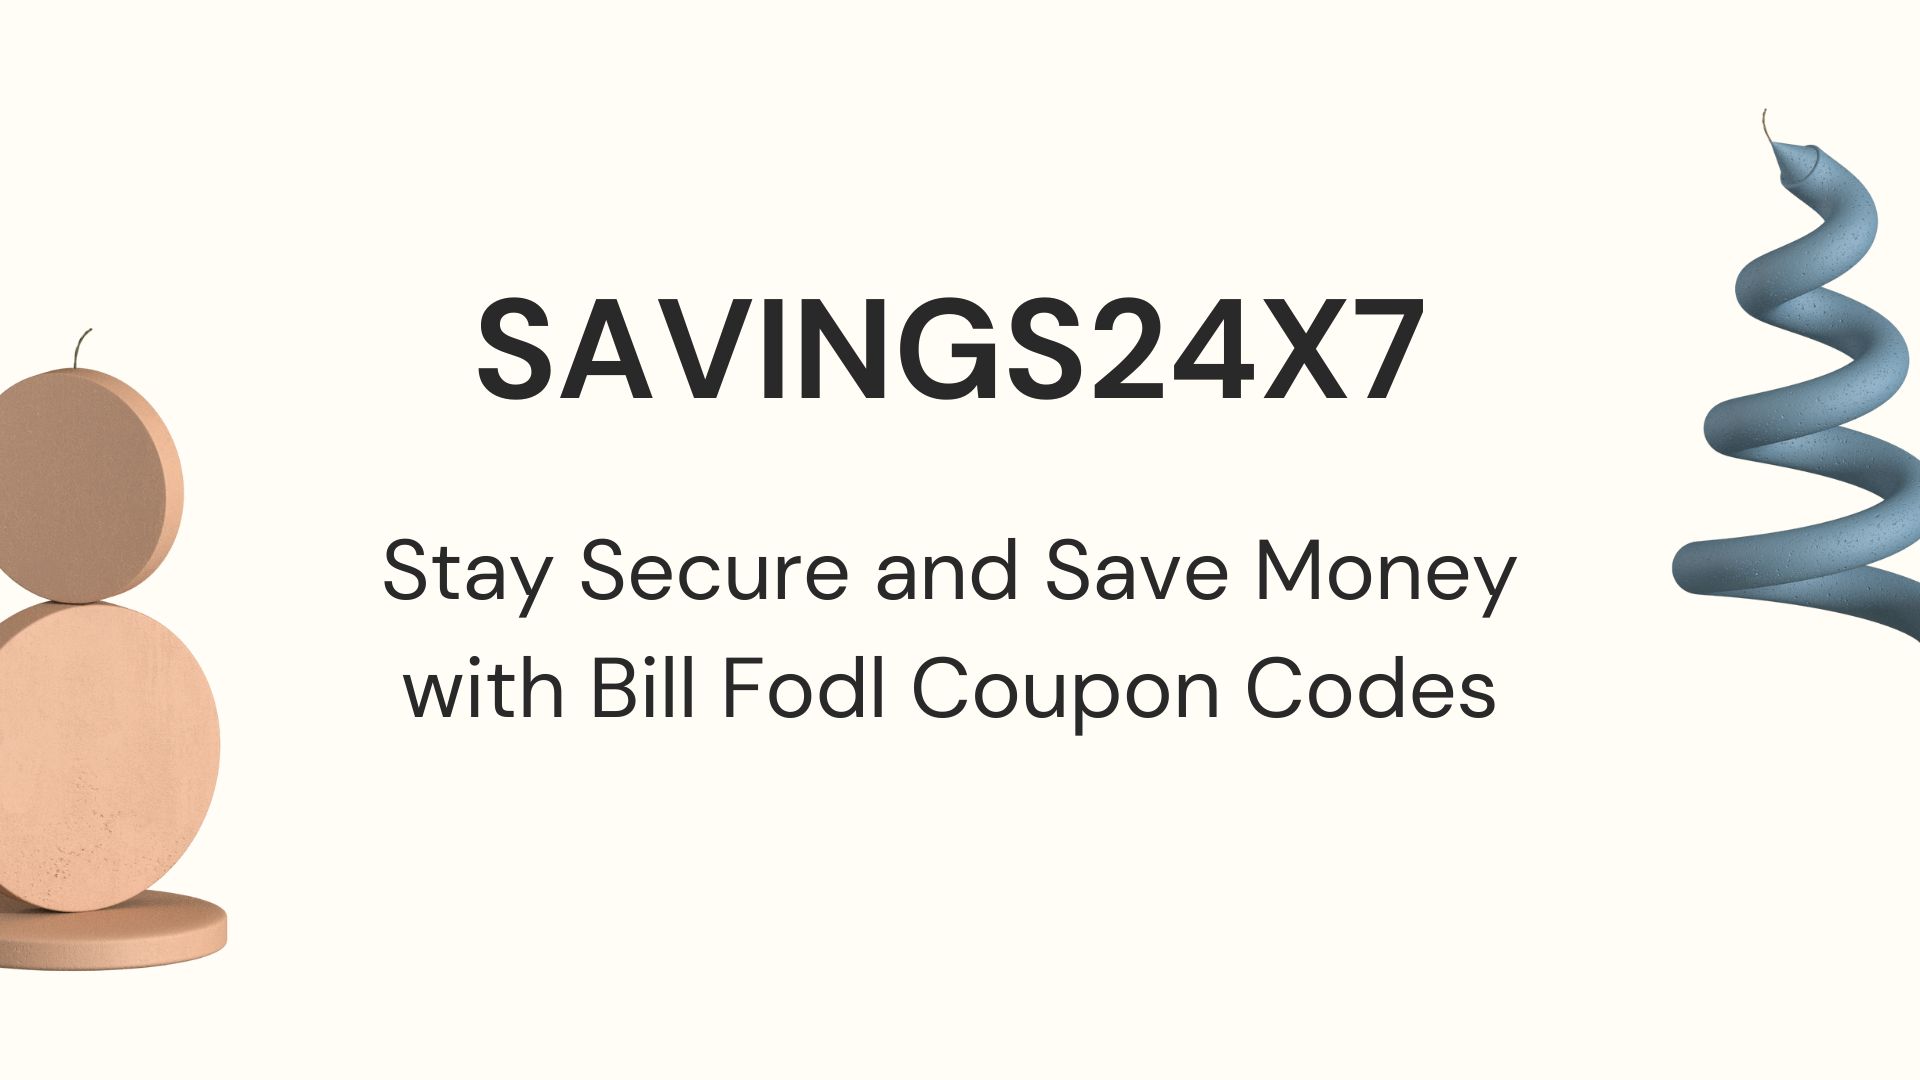 Bill Fodl Coupon Codes